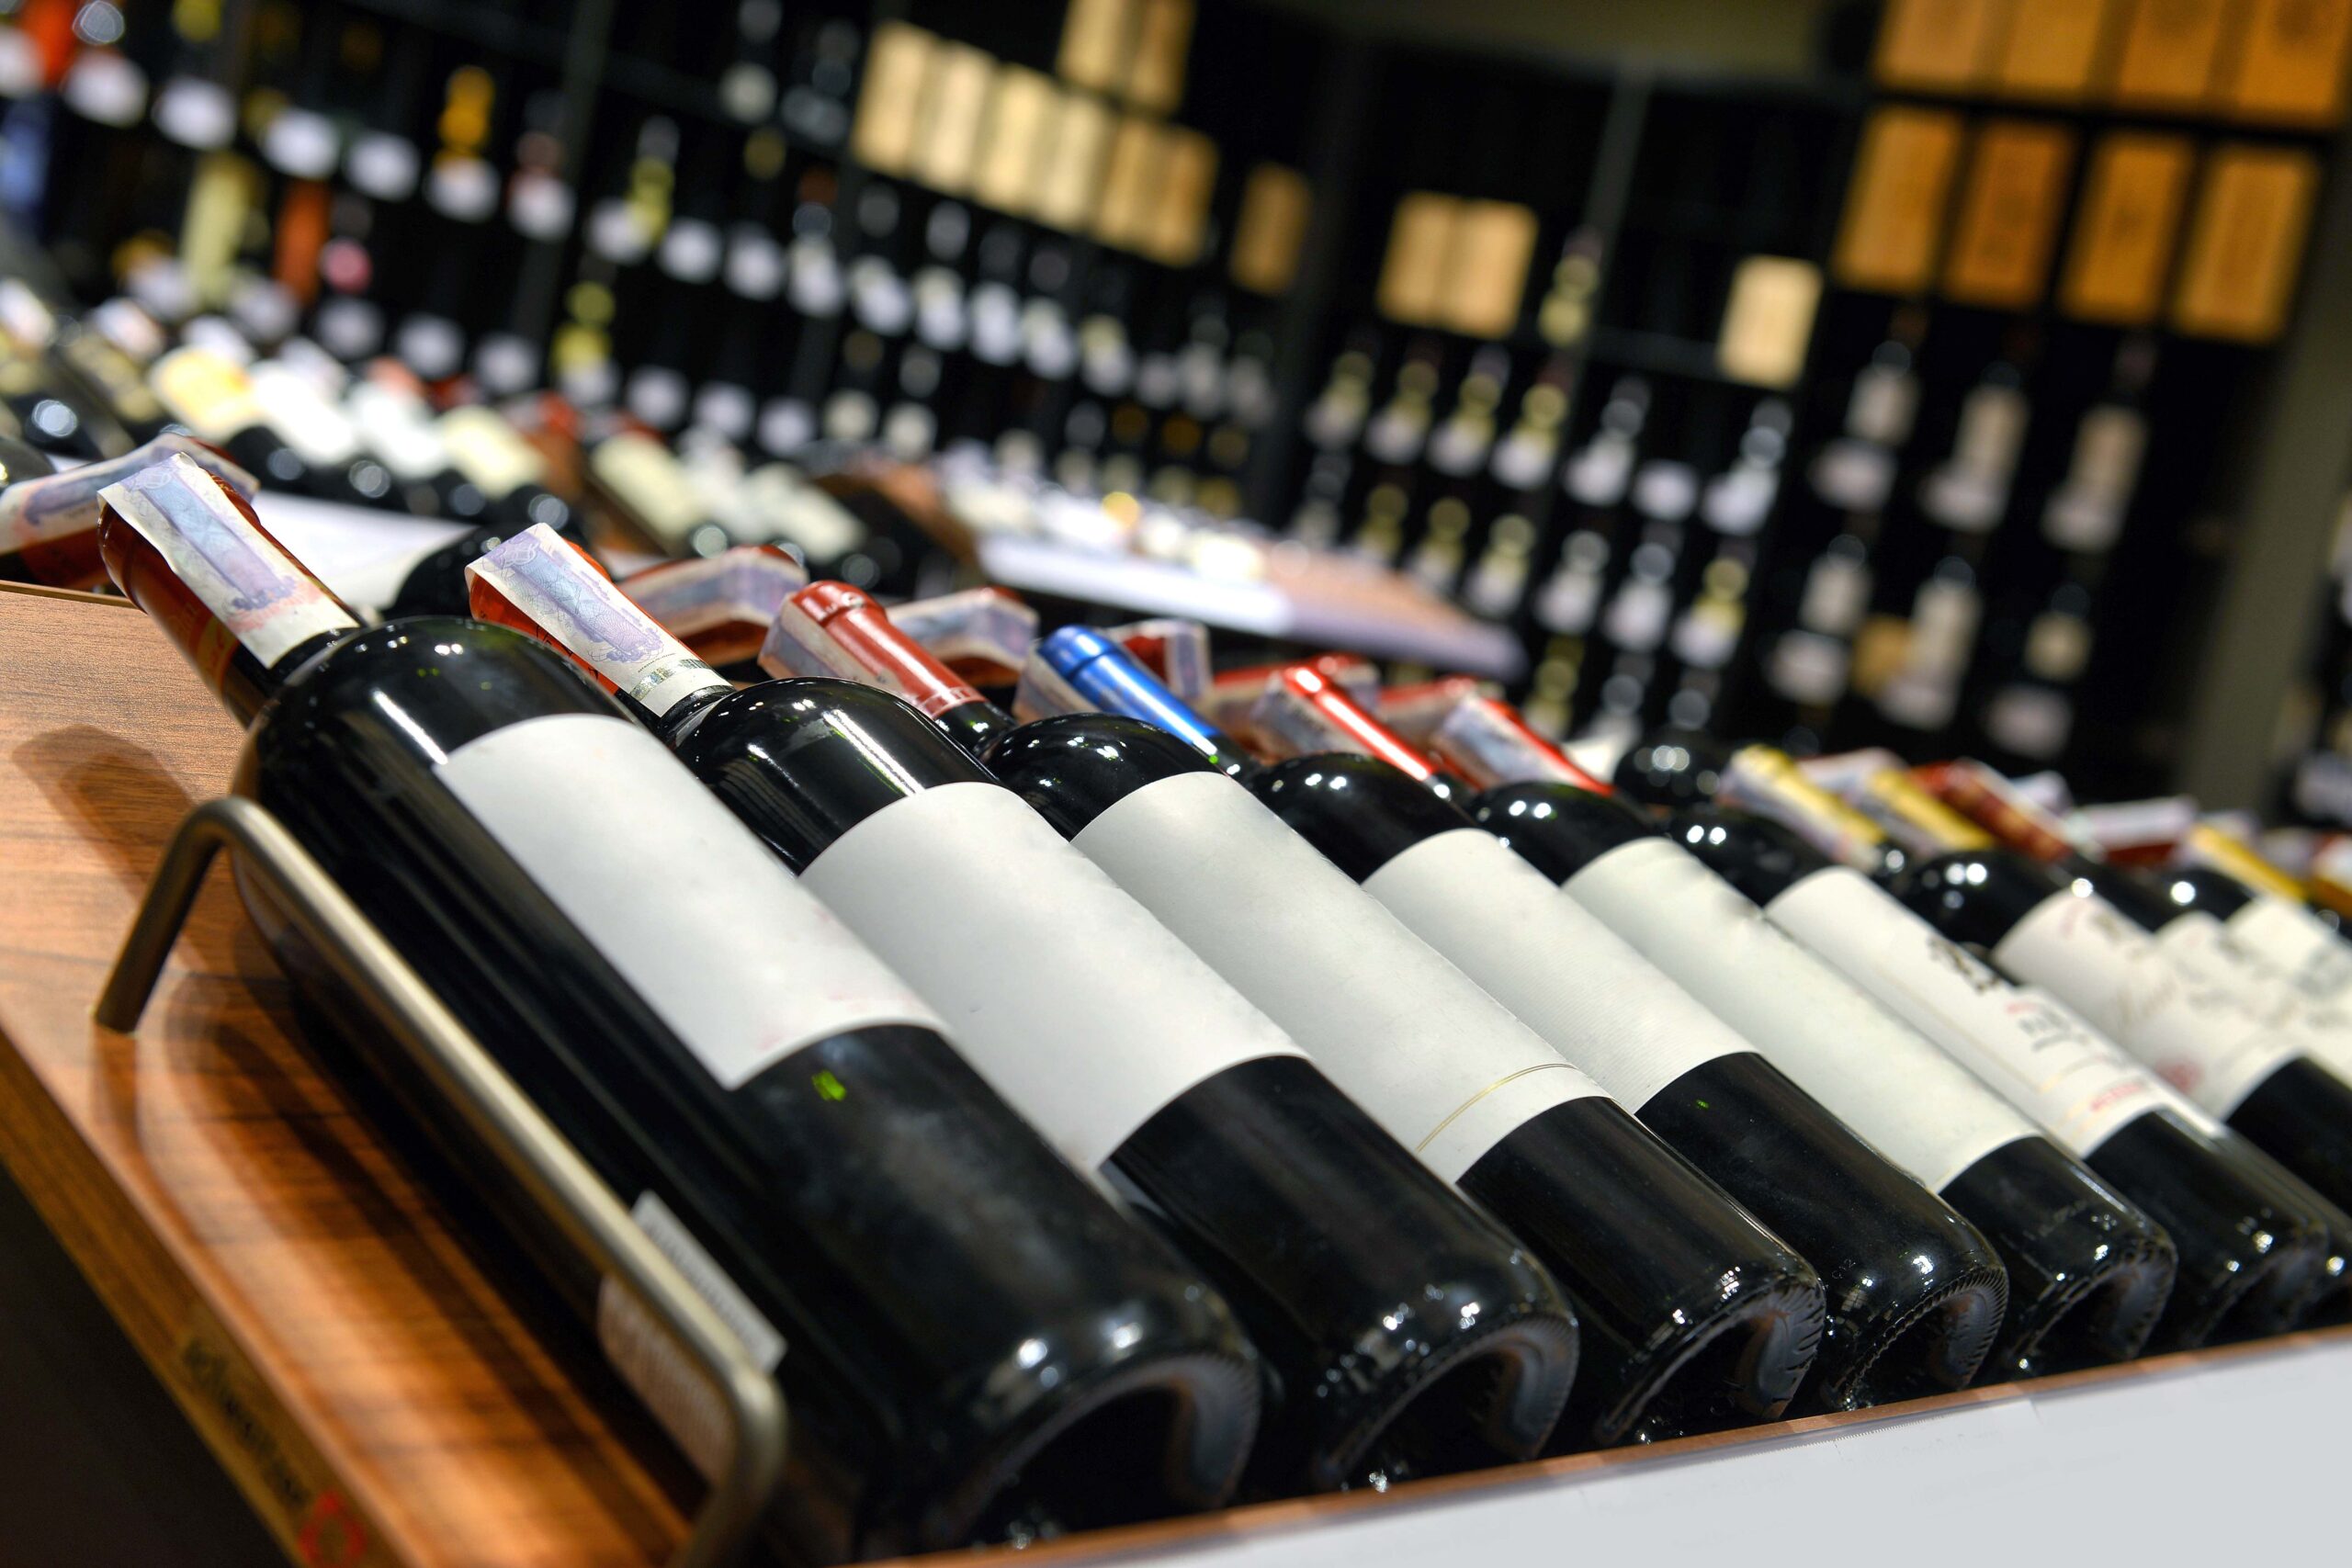 14 Best Wines At Costco According To A